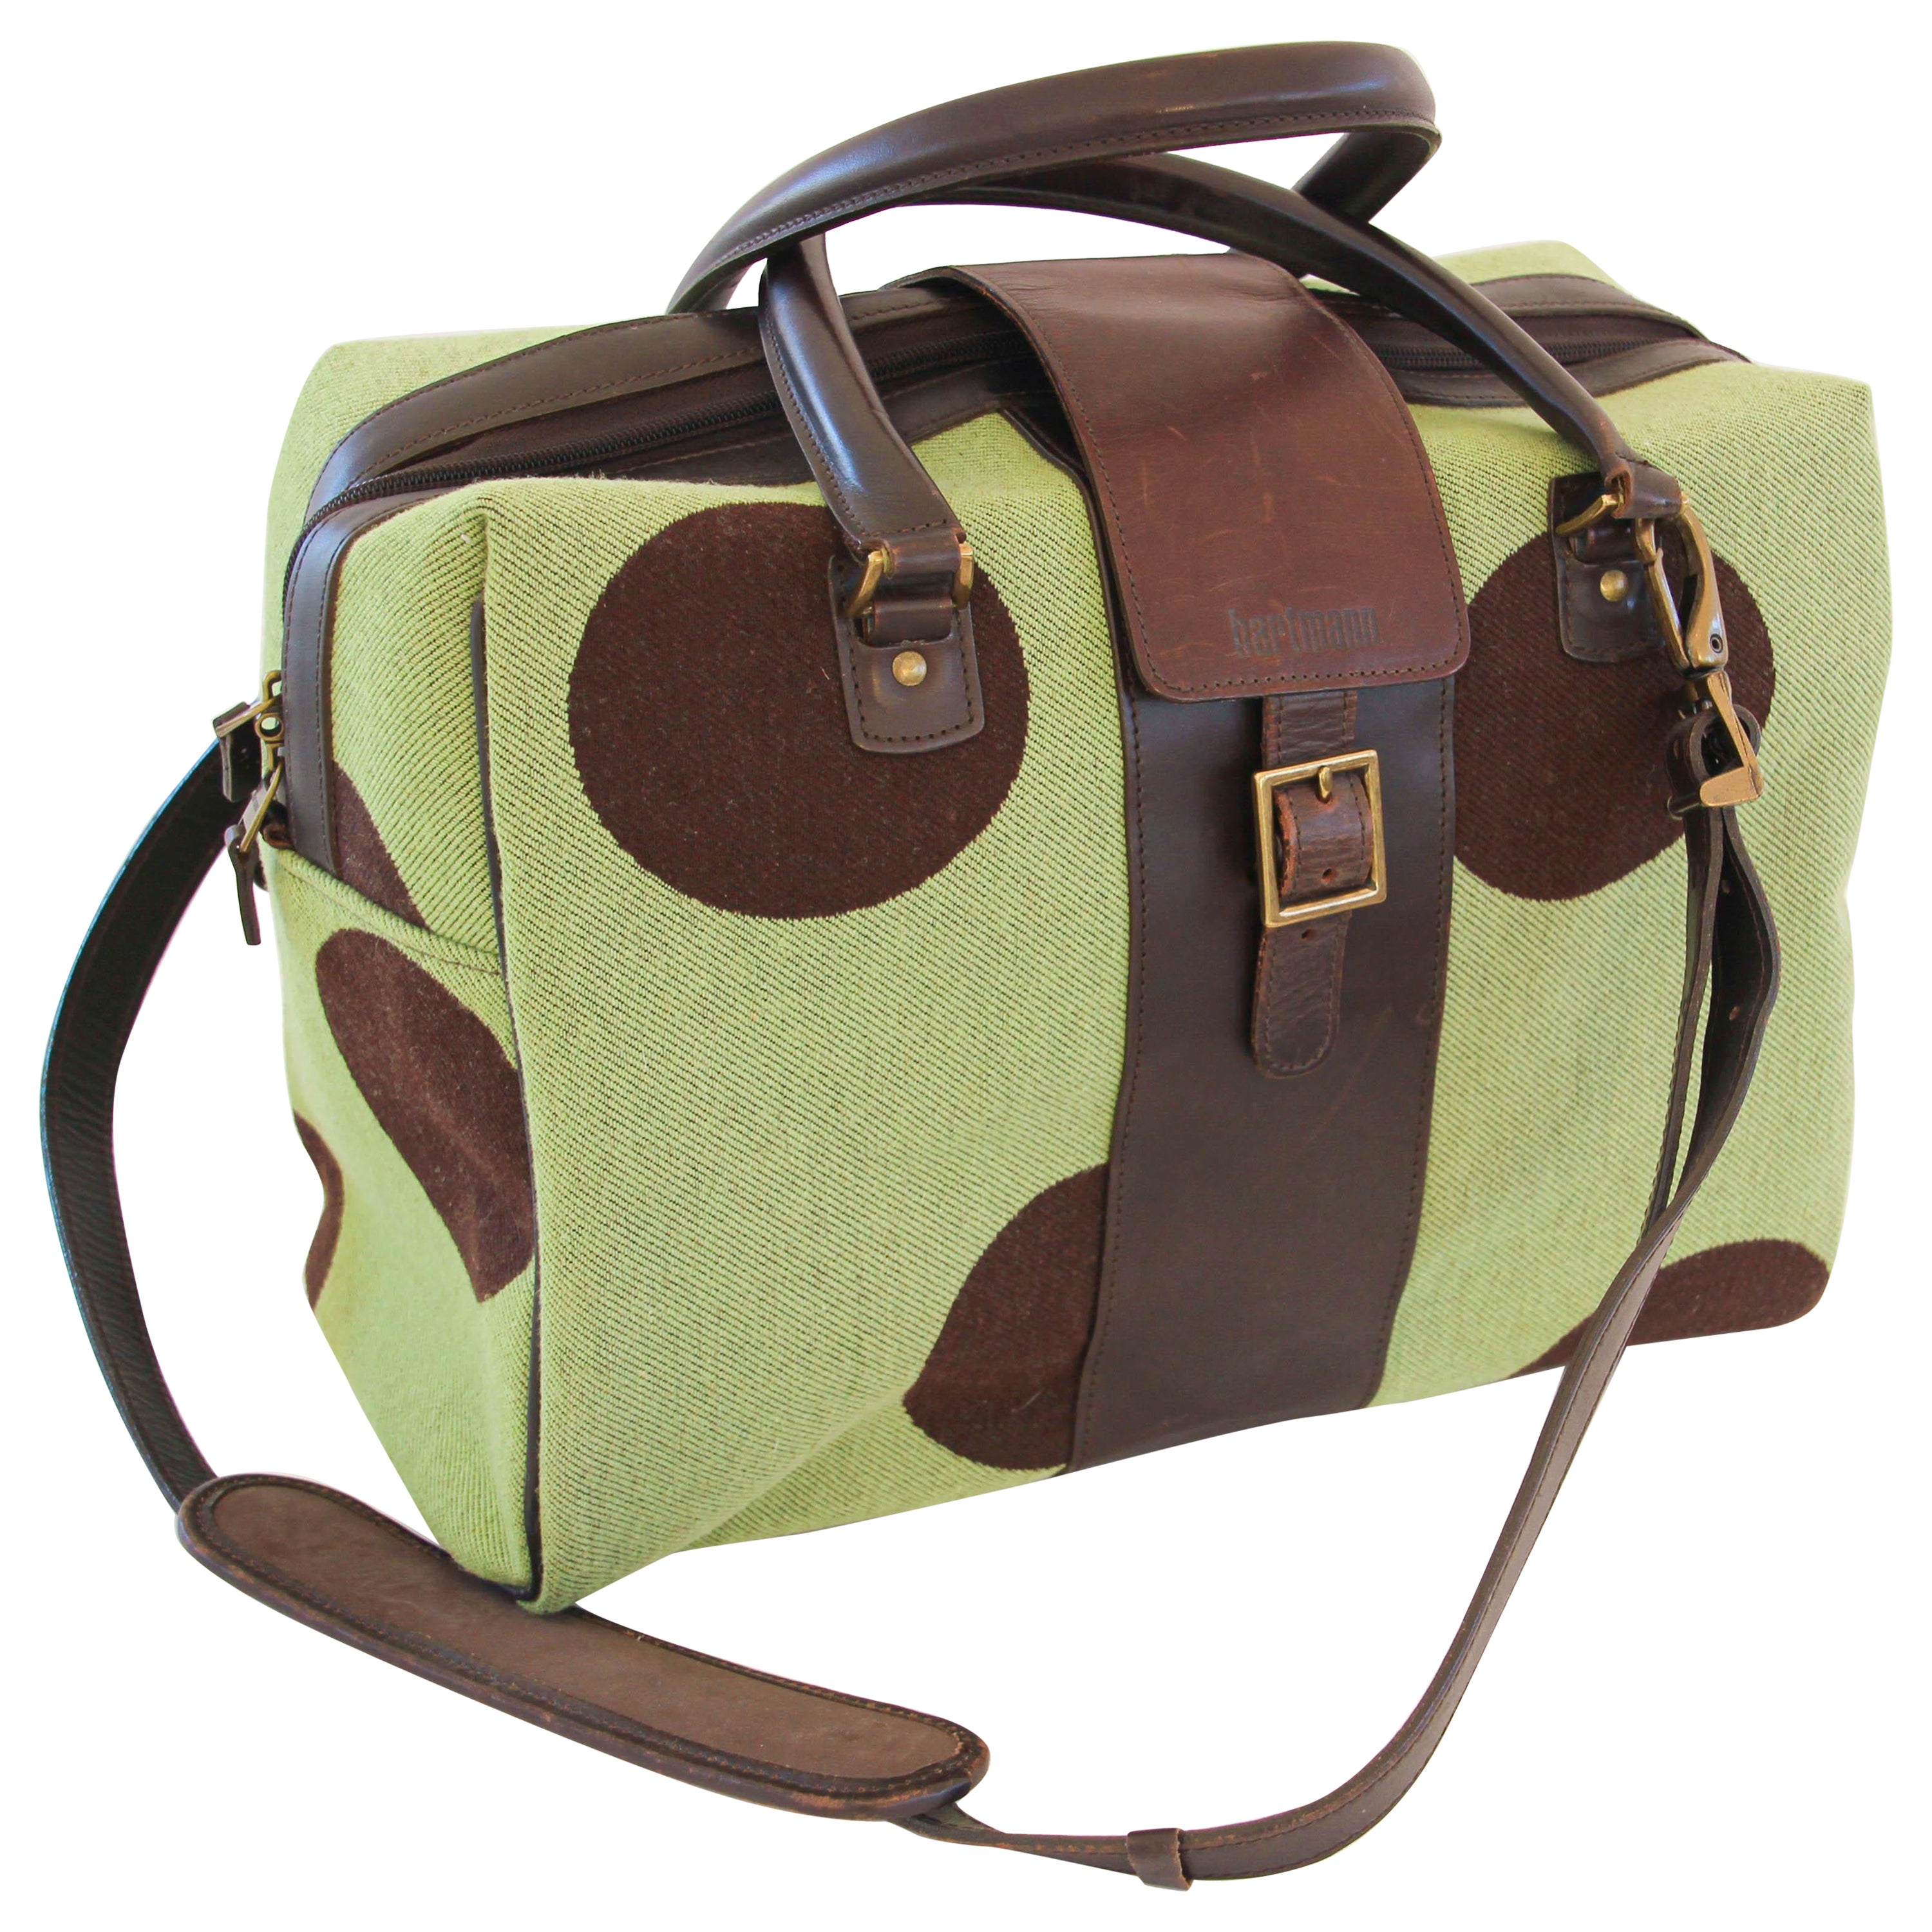 Hartmann Retro Carry-On in Apple Green with Polka Dot